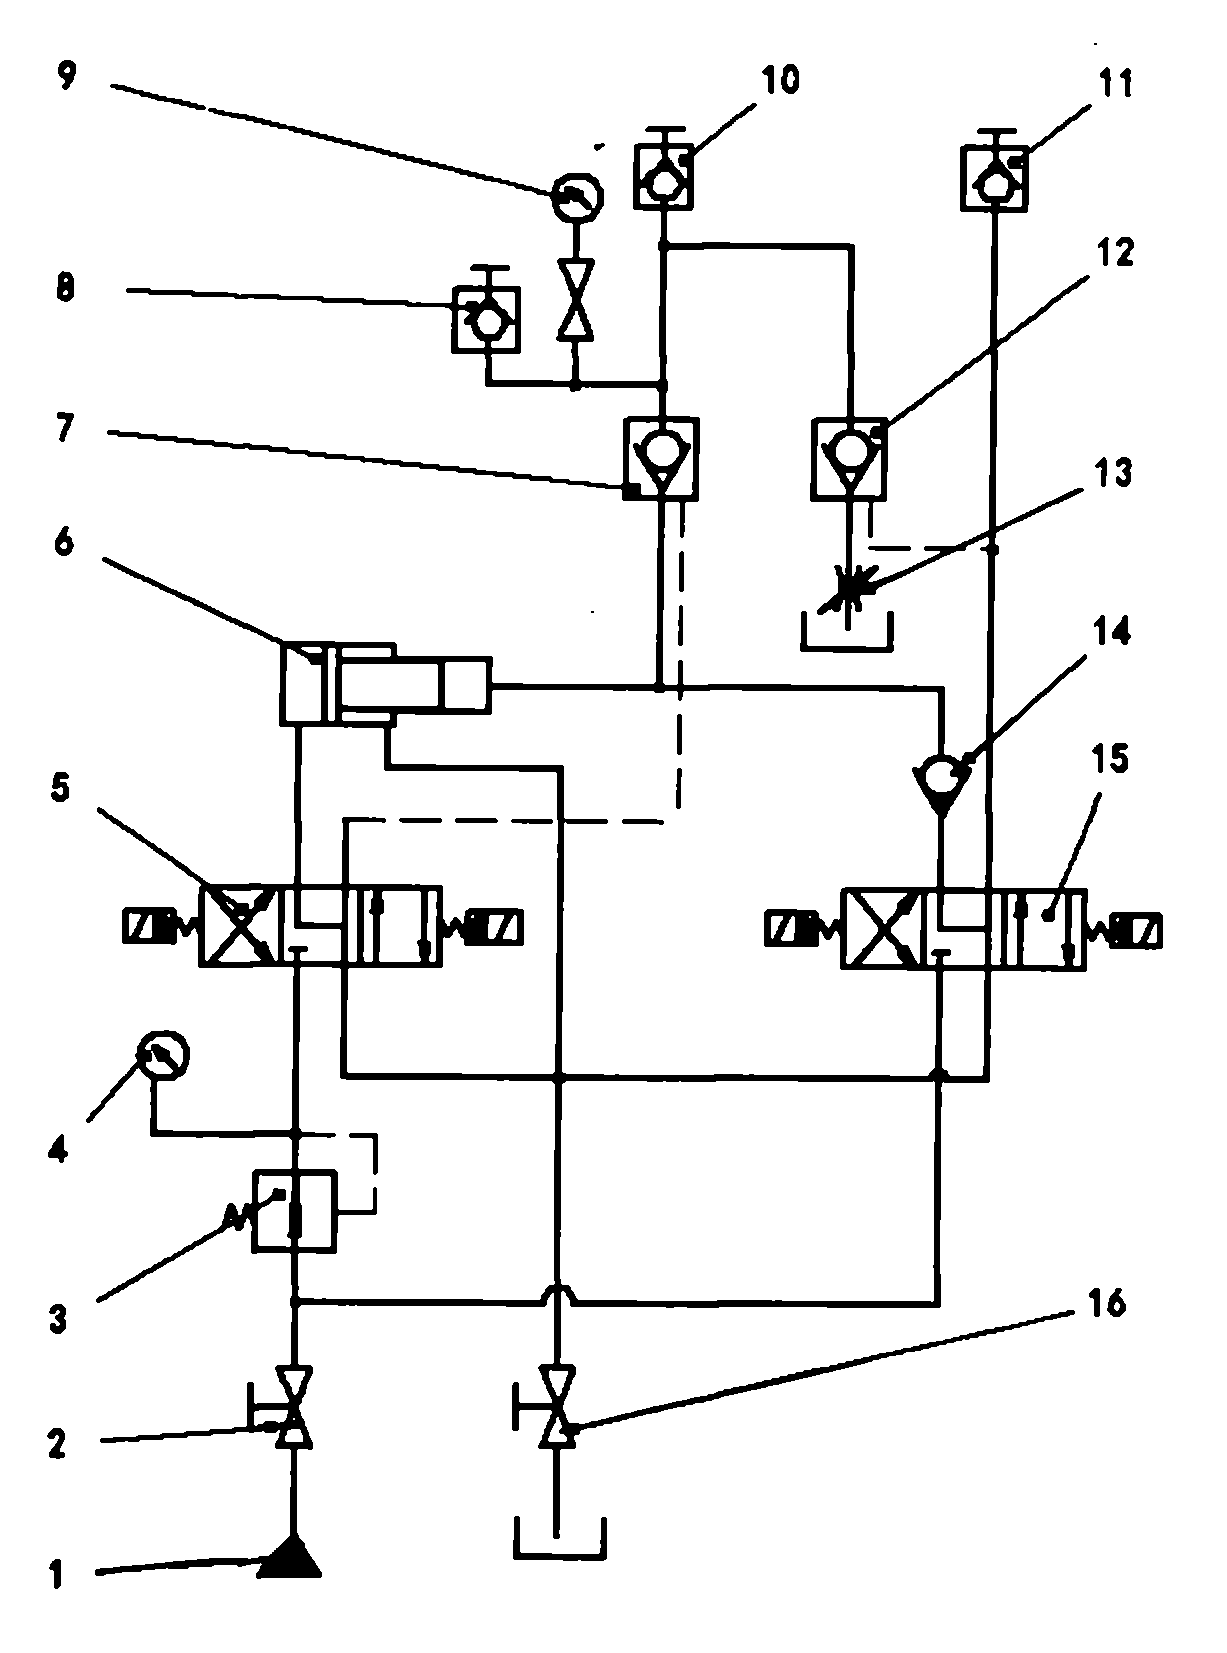 Ultra-high pressure high flow supercharging and unloading system